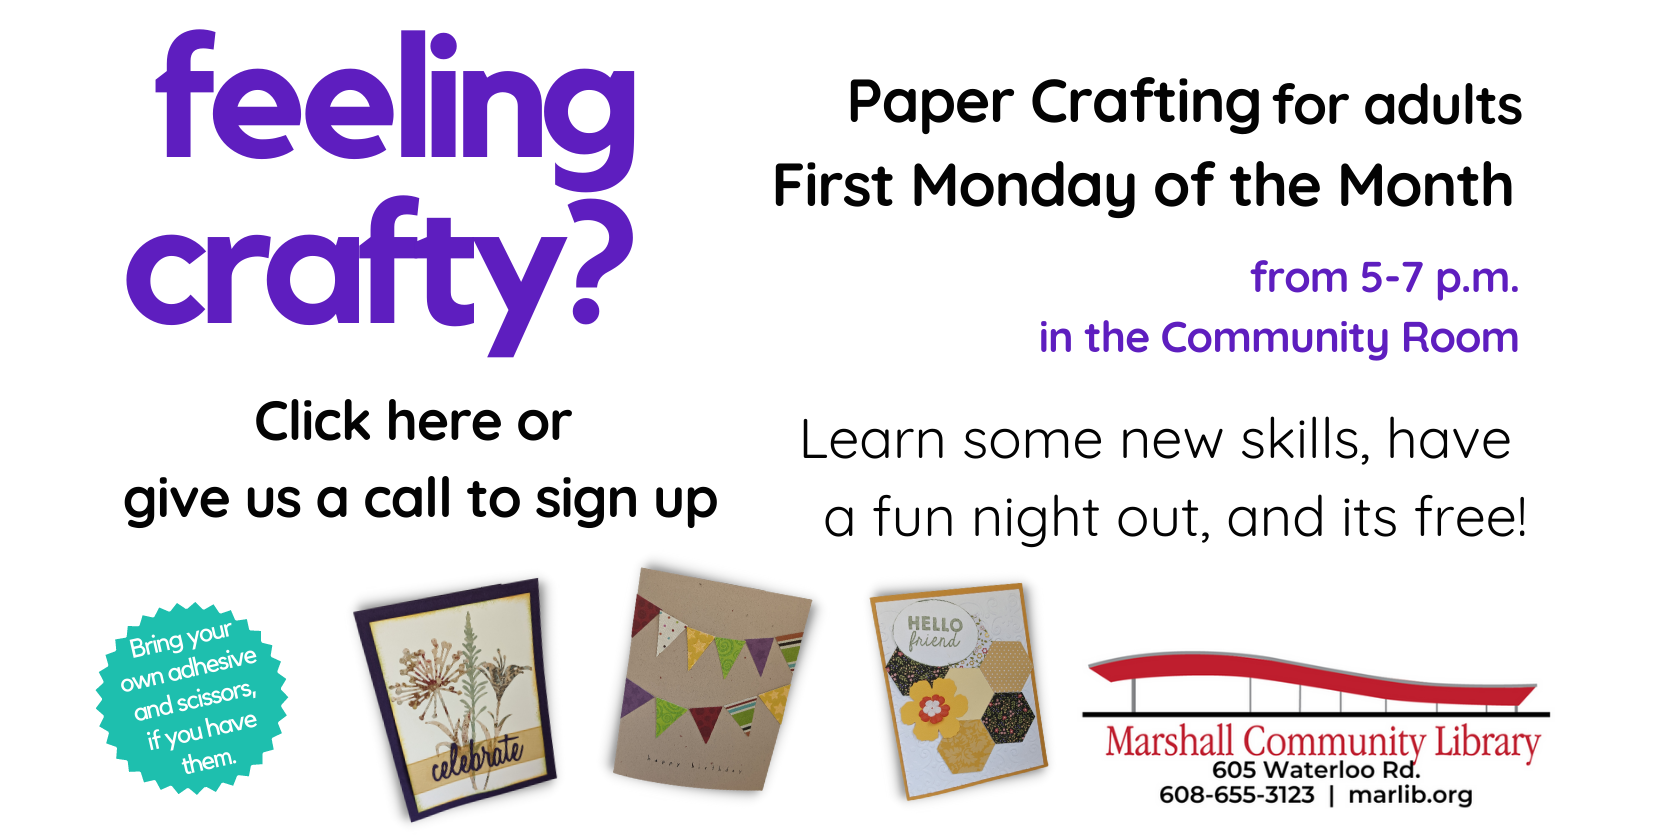 Paper craft first Monday at 5